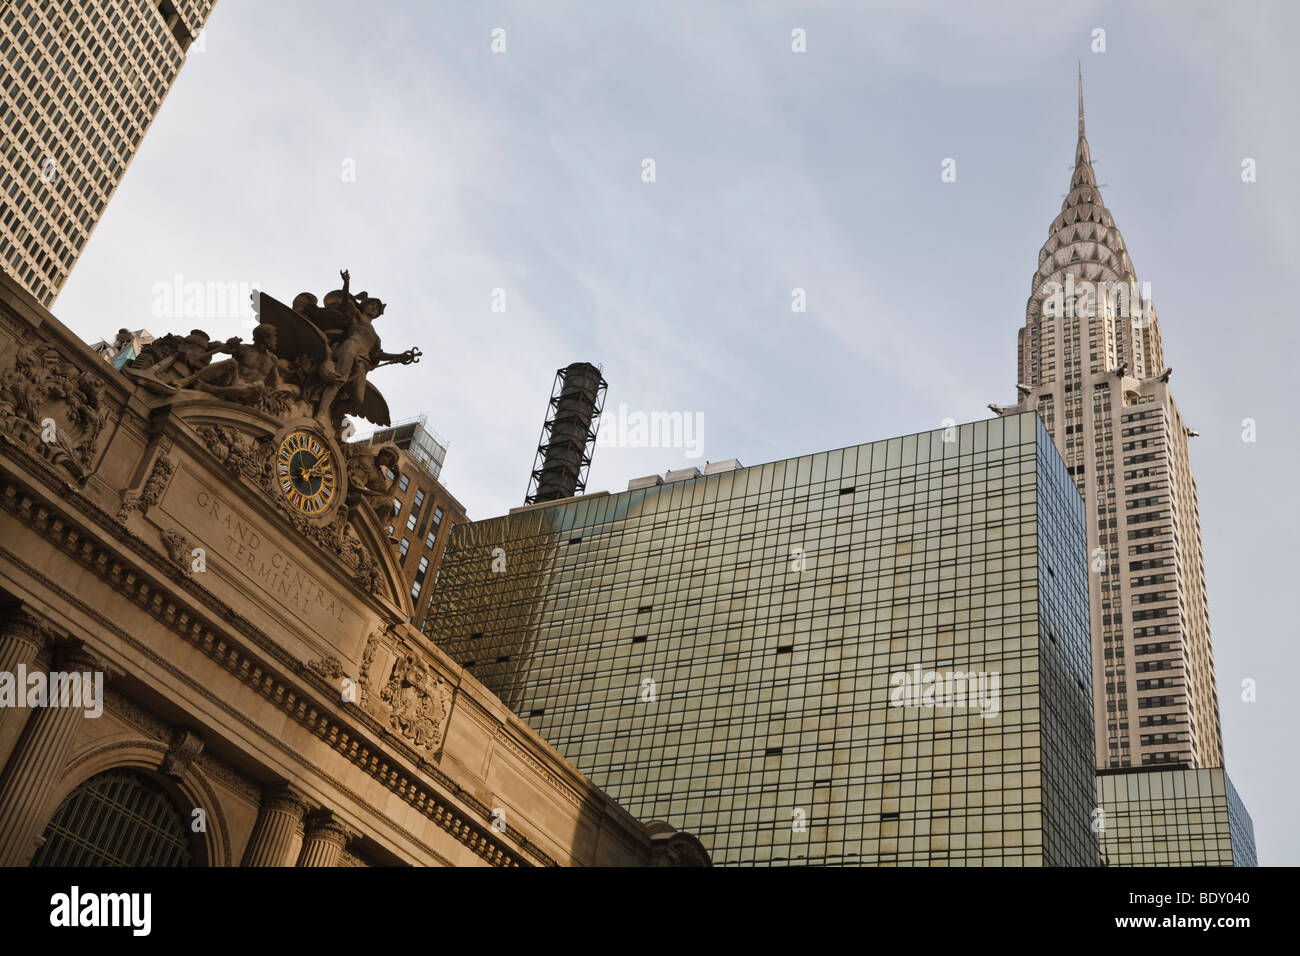 Facade of Grand Central Station, New York, with the Chrysler Building in the background Stock Photo